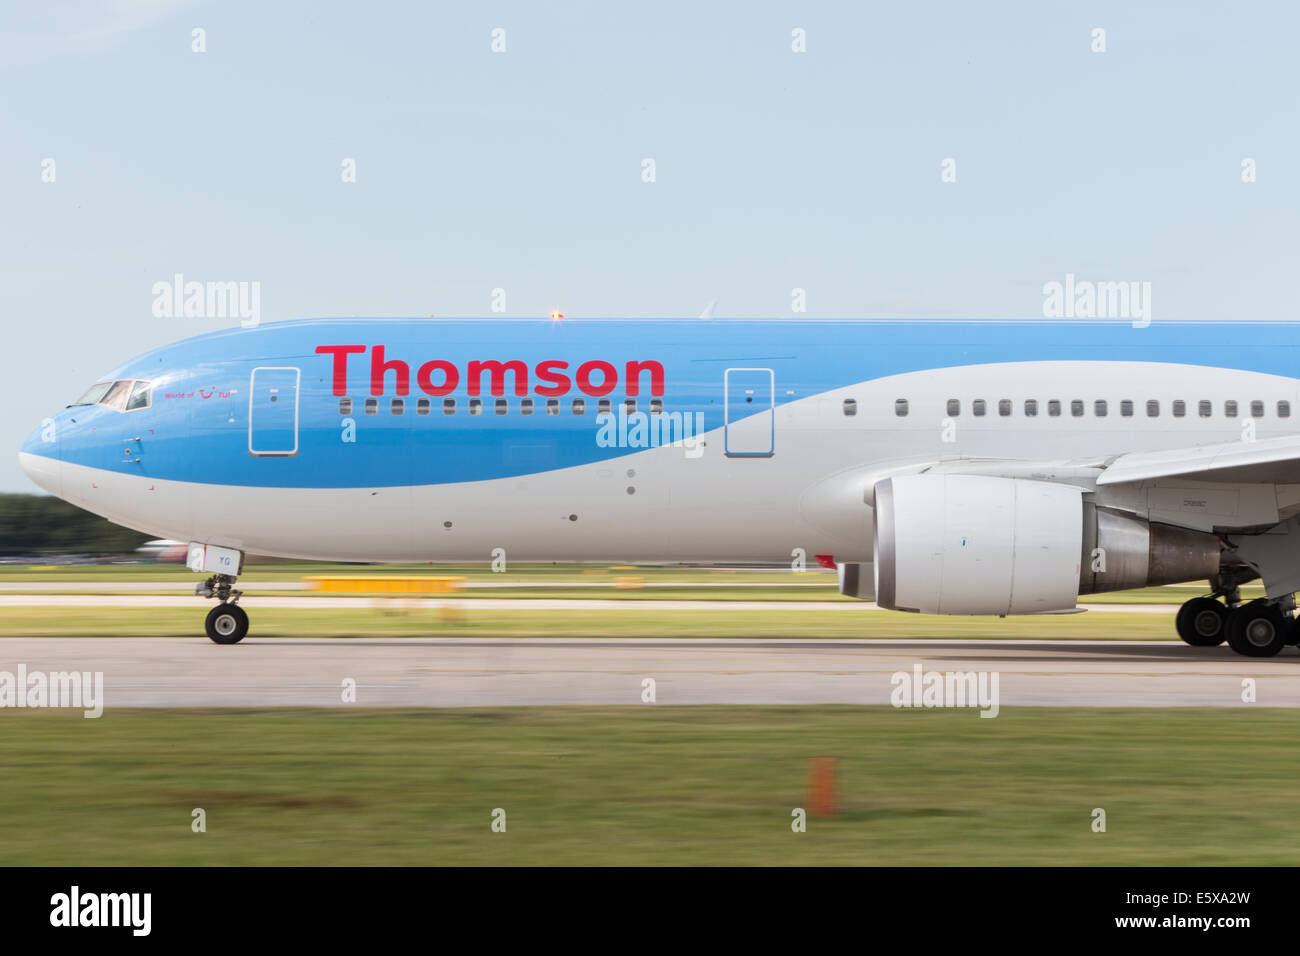 A Thomson flight taking off from an airport. Stock Photo